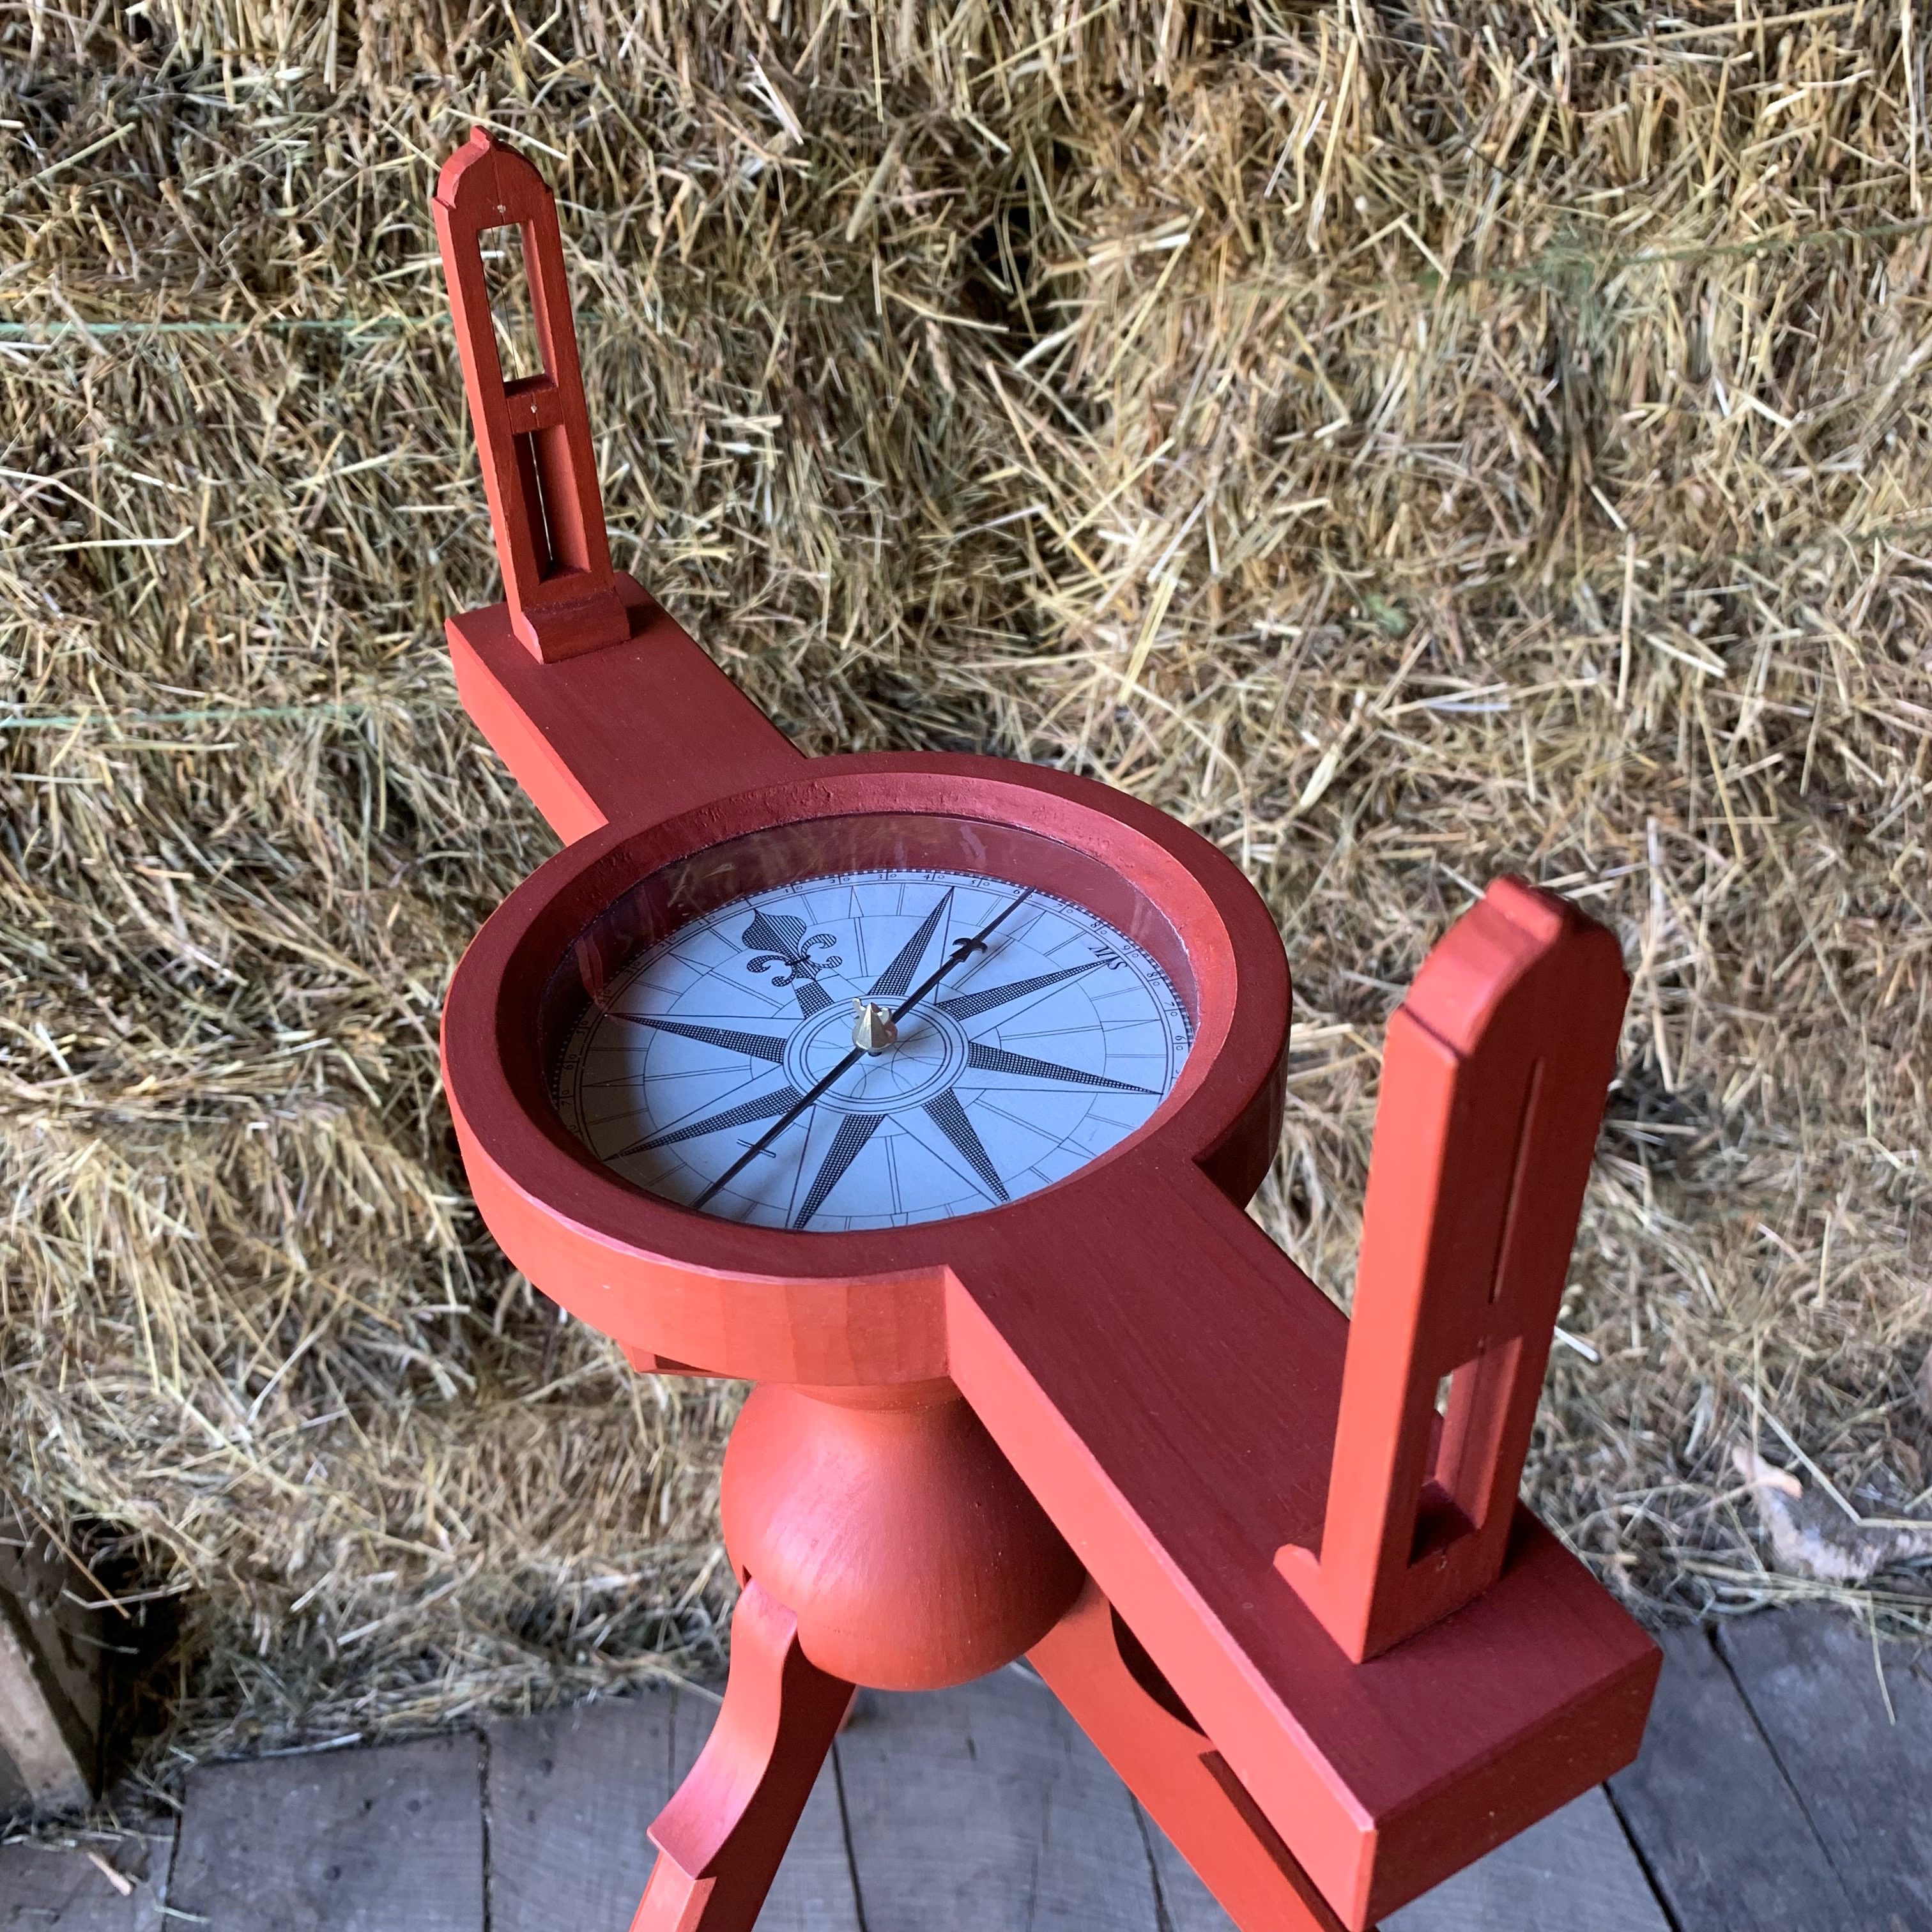 Wooden Surveyors compass, painted salem red